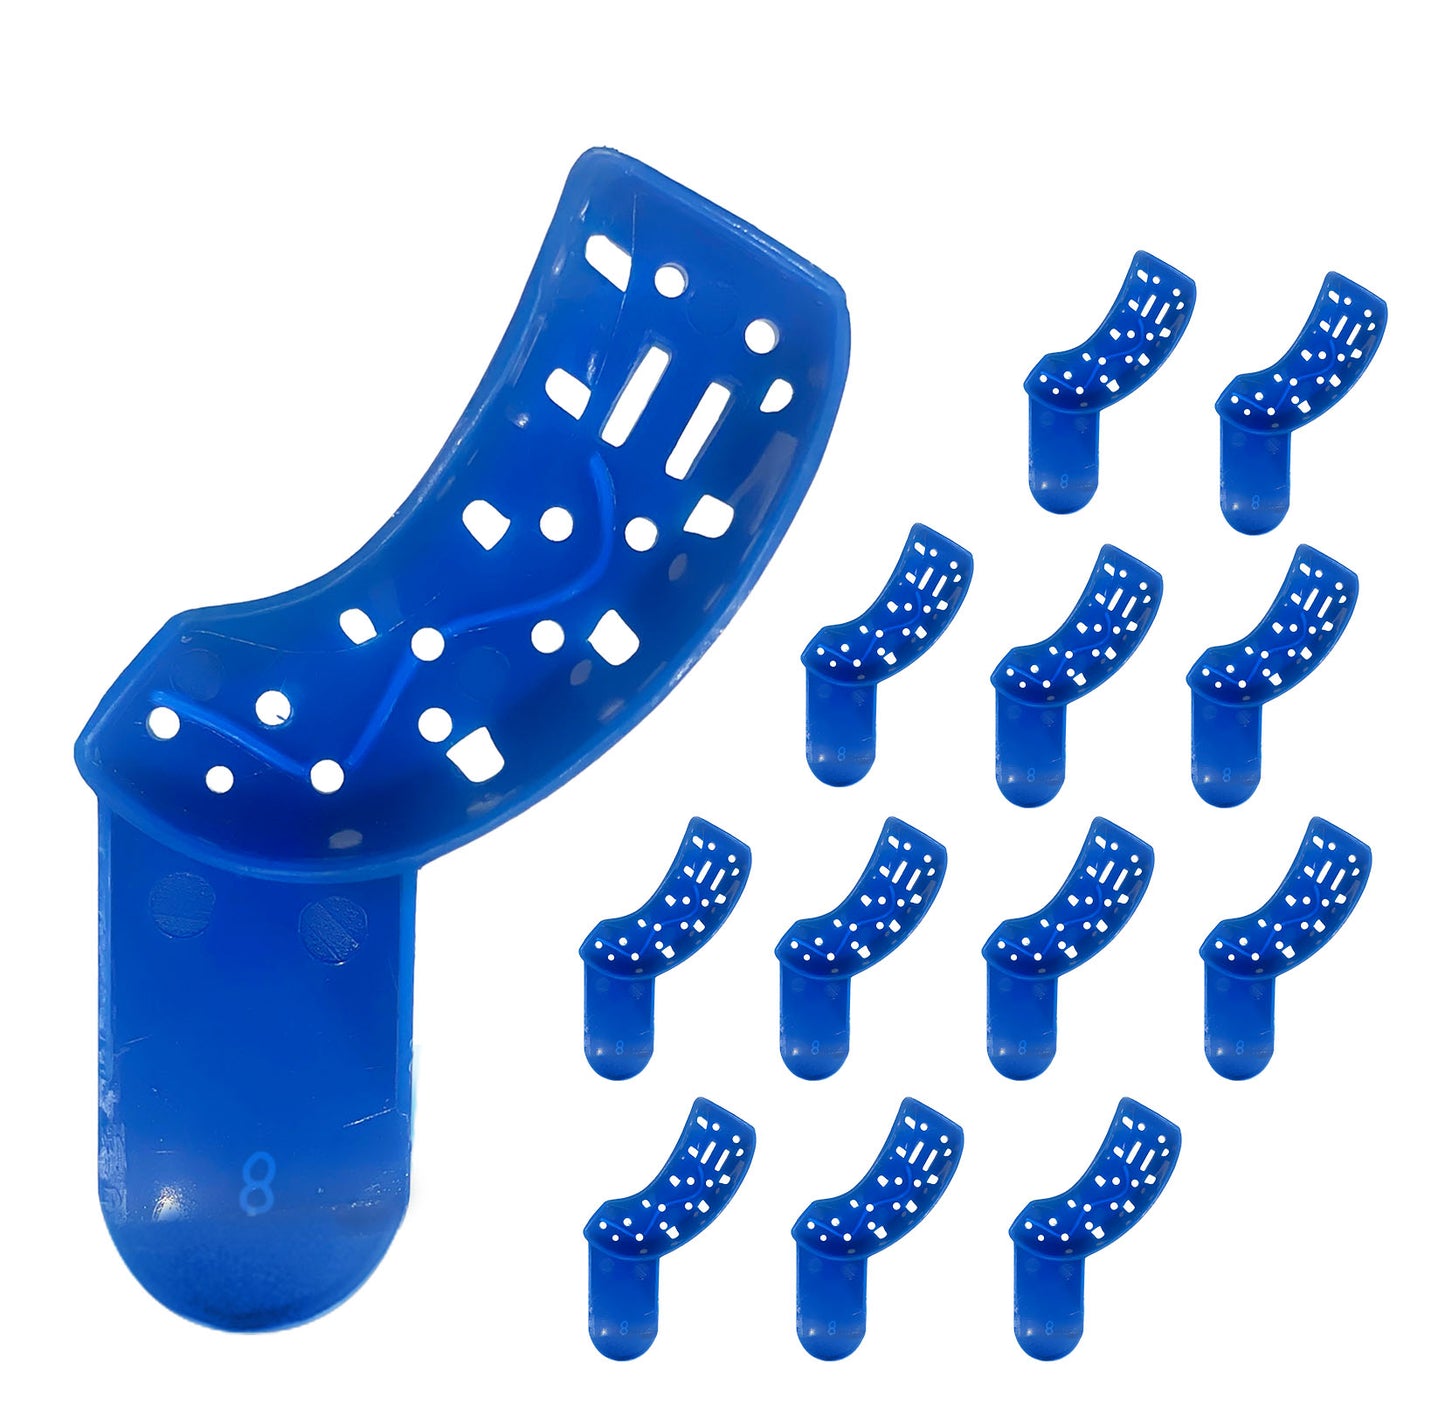 Royal Blue Premium Disposable Tracking Spacer Plastic Dental Impression Trays 12 PC Small, Medium, Large, Upper-Left, Lower-Right